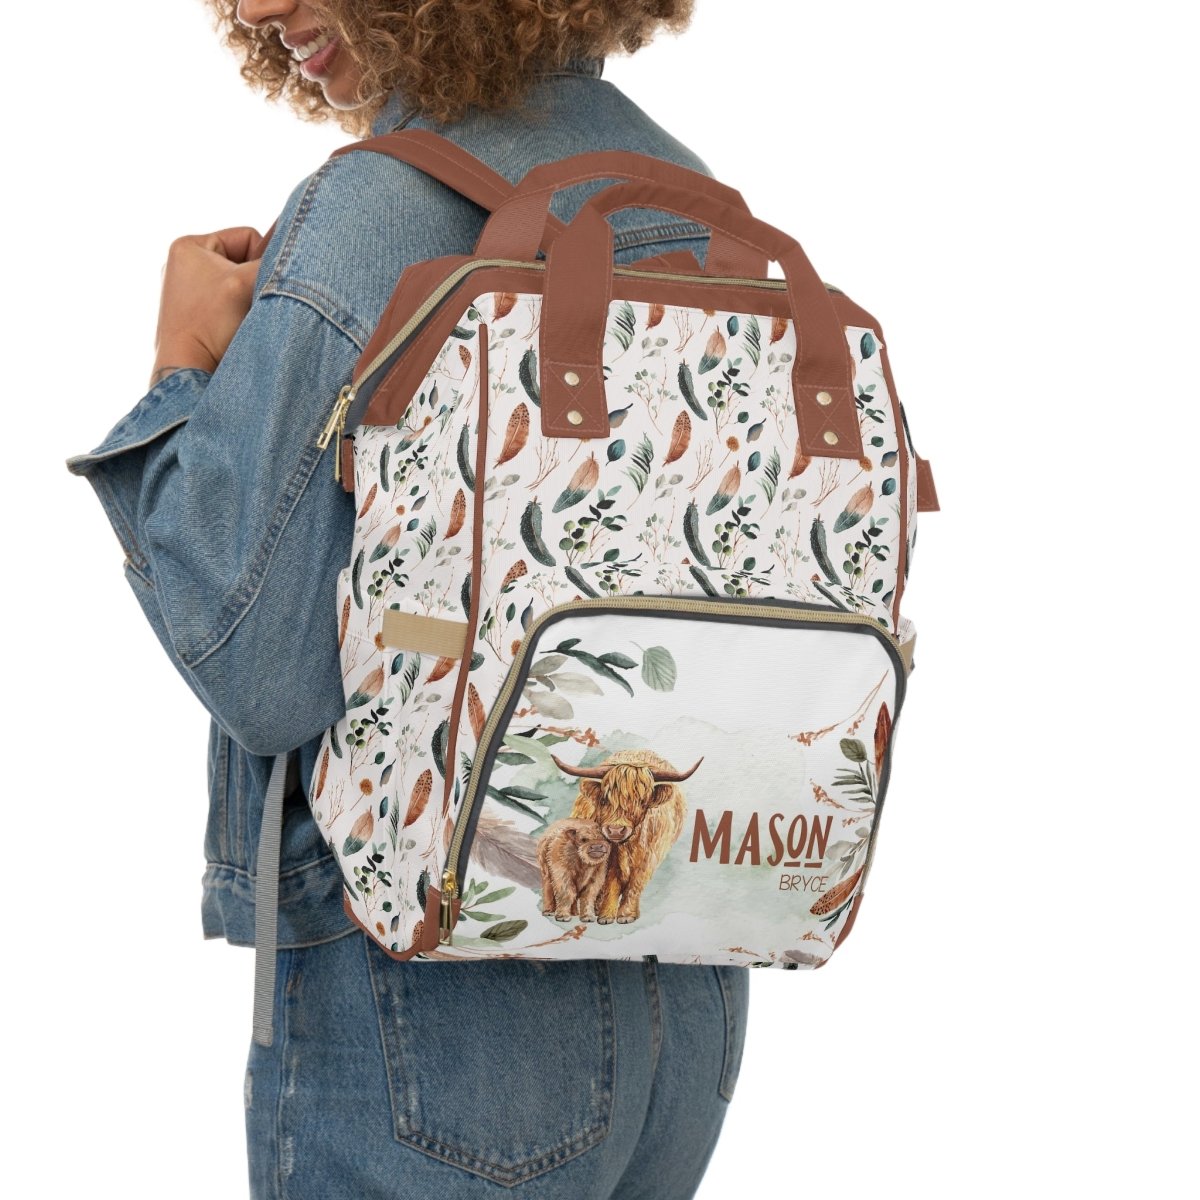 Highland Cow Feathers Personalized Backpack Diaper Bag - gender_boy, Highland Cow Feathers, text